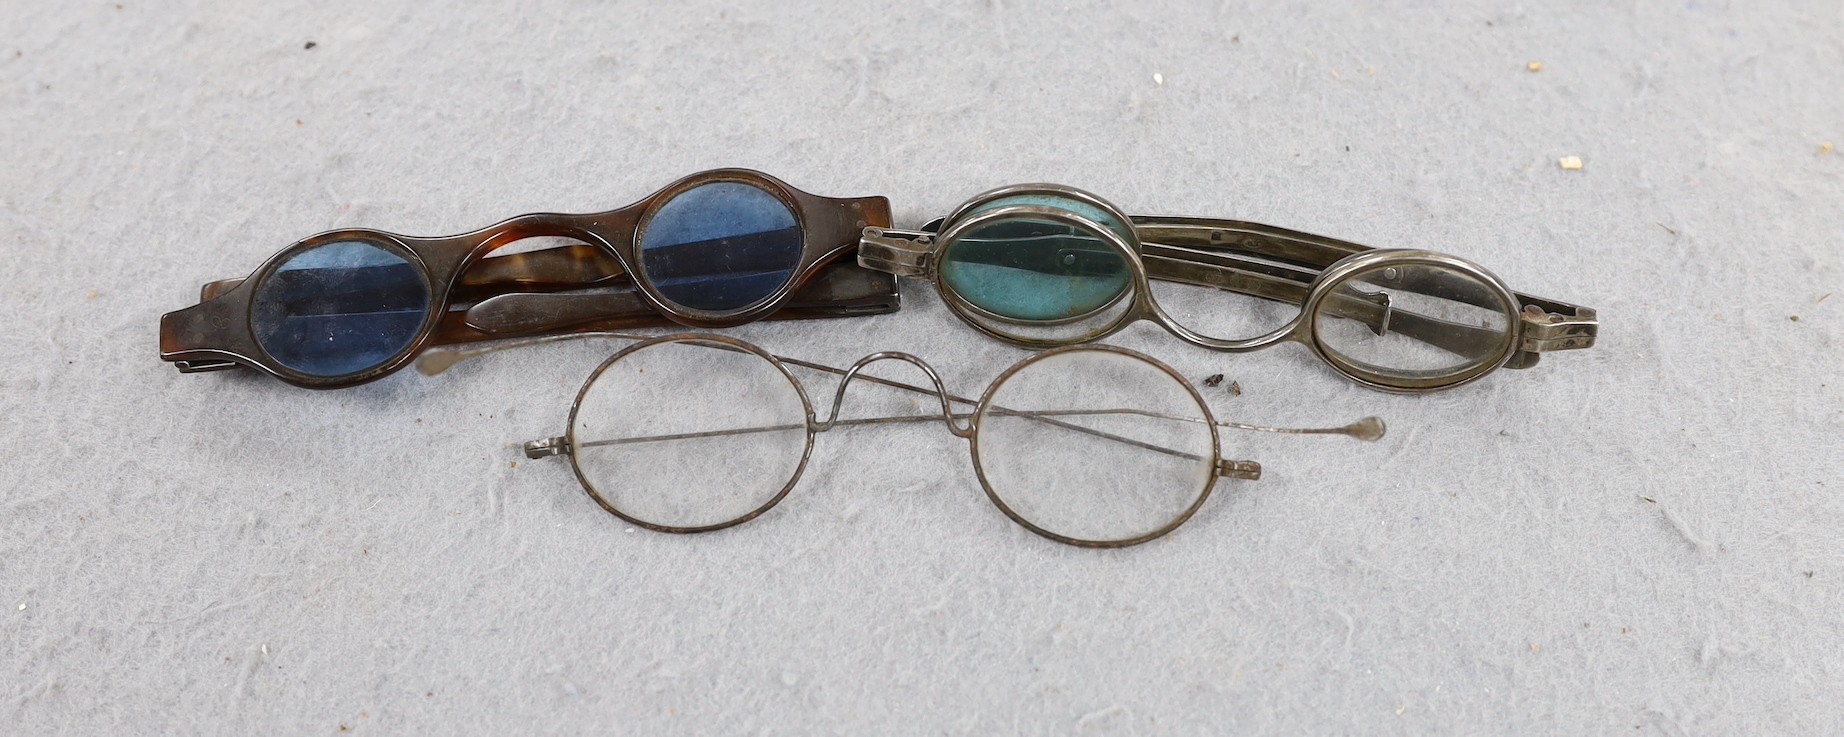 A pair of George IV silver mounted spectacles, with four lenses, (two folding and one missing), Joseph Wilmore, Birmingham, 1825? and tow other pairs of spectacles.